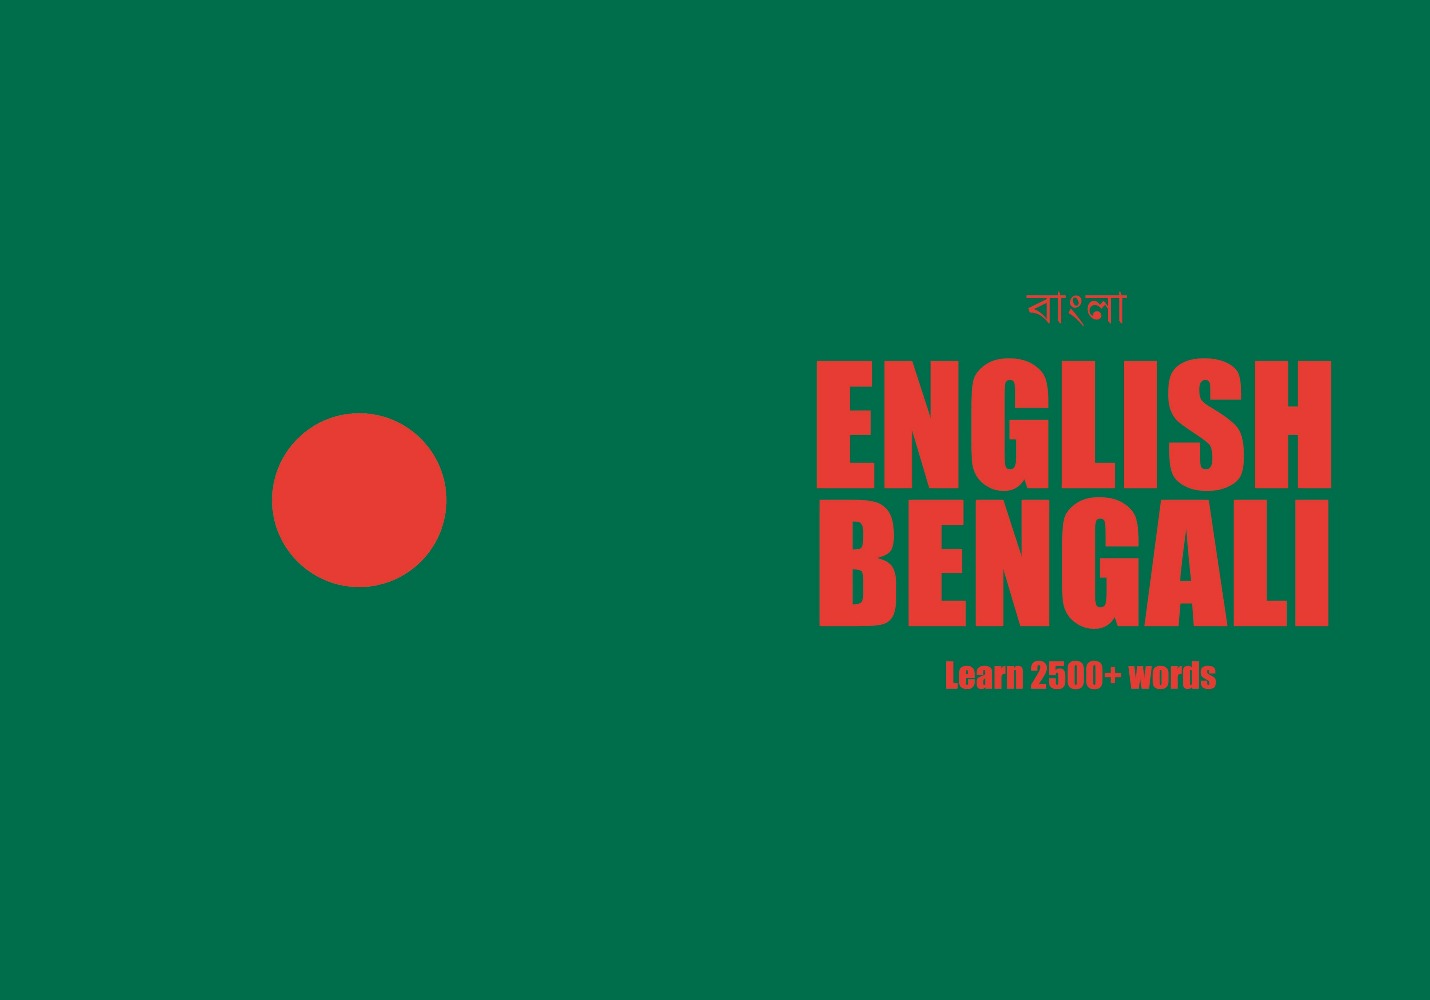 Bengali language learning notebook cover